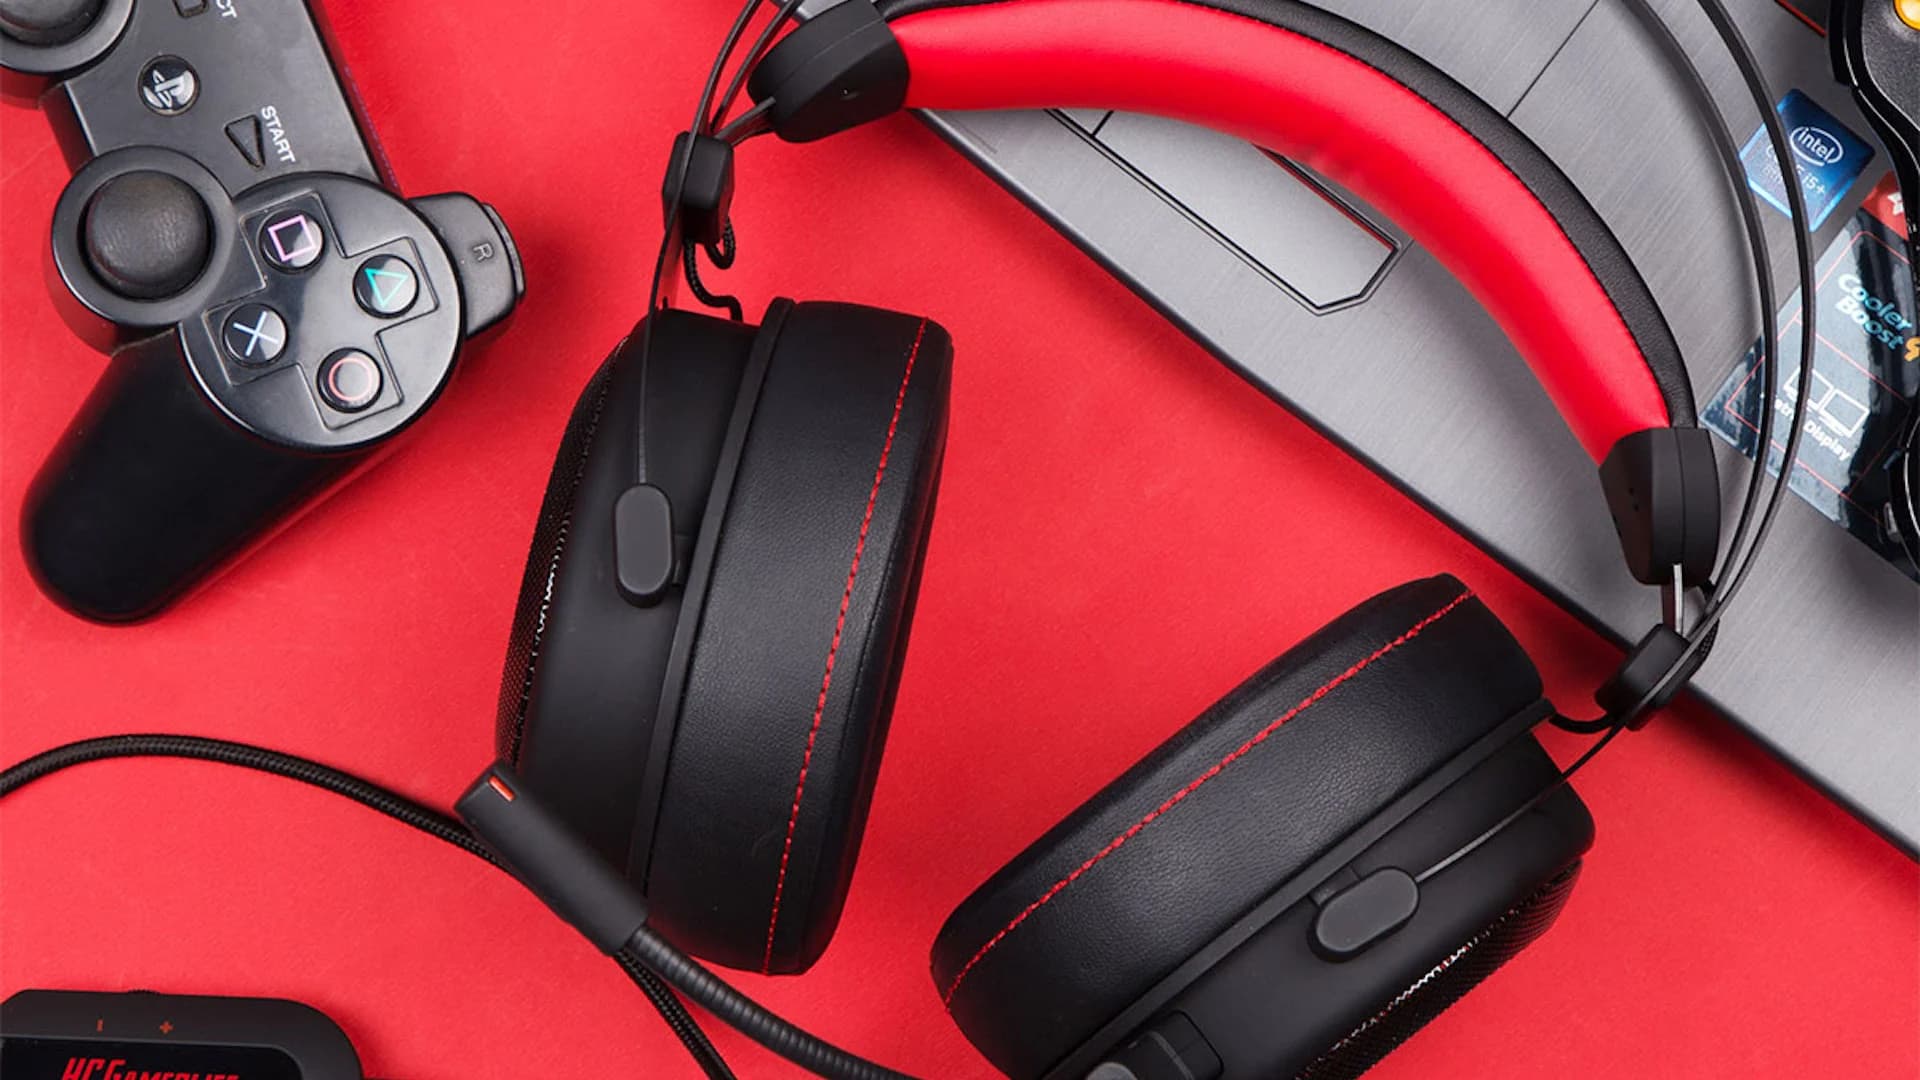 7 great gift ideas for the gamers in your life